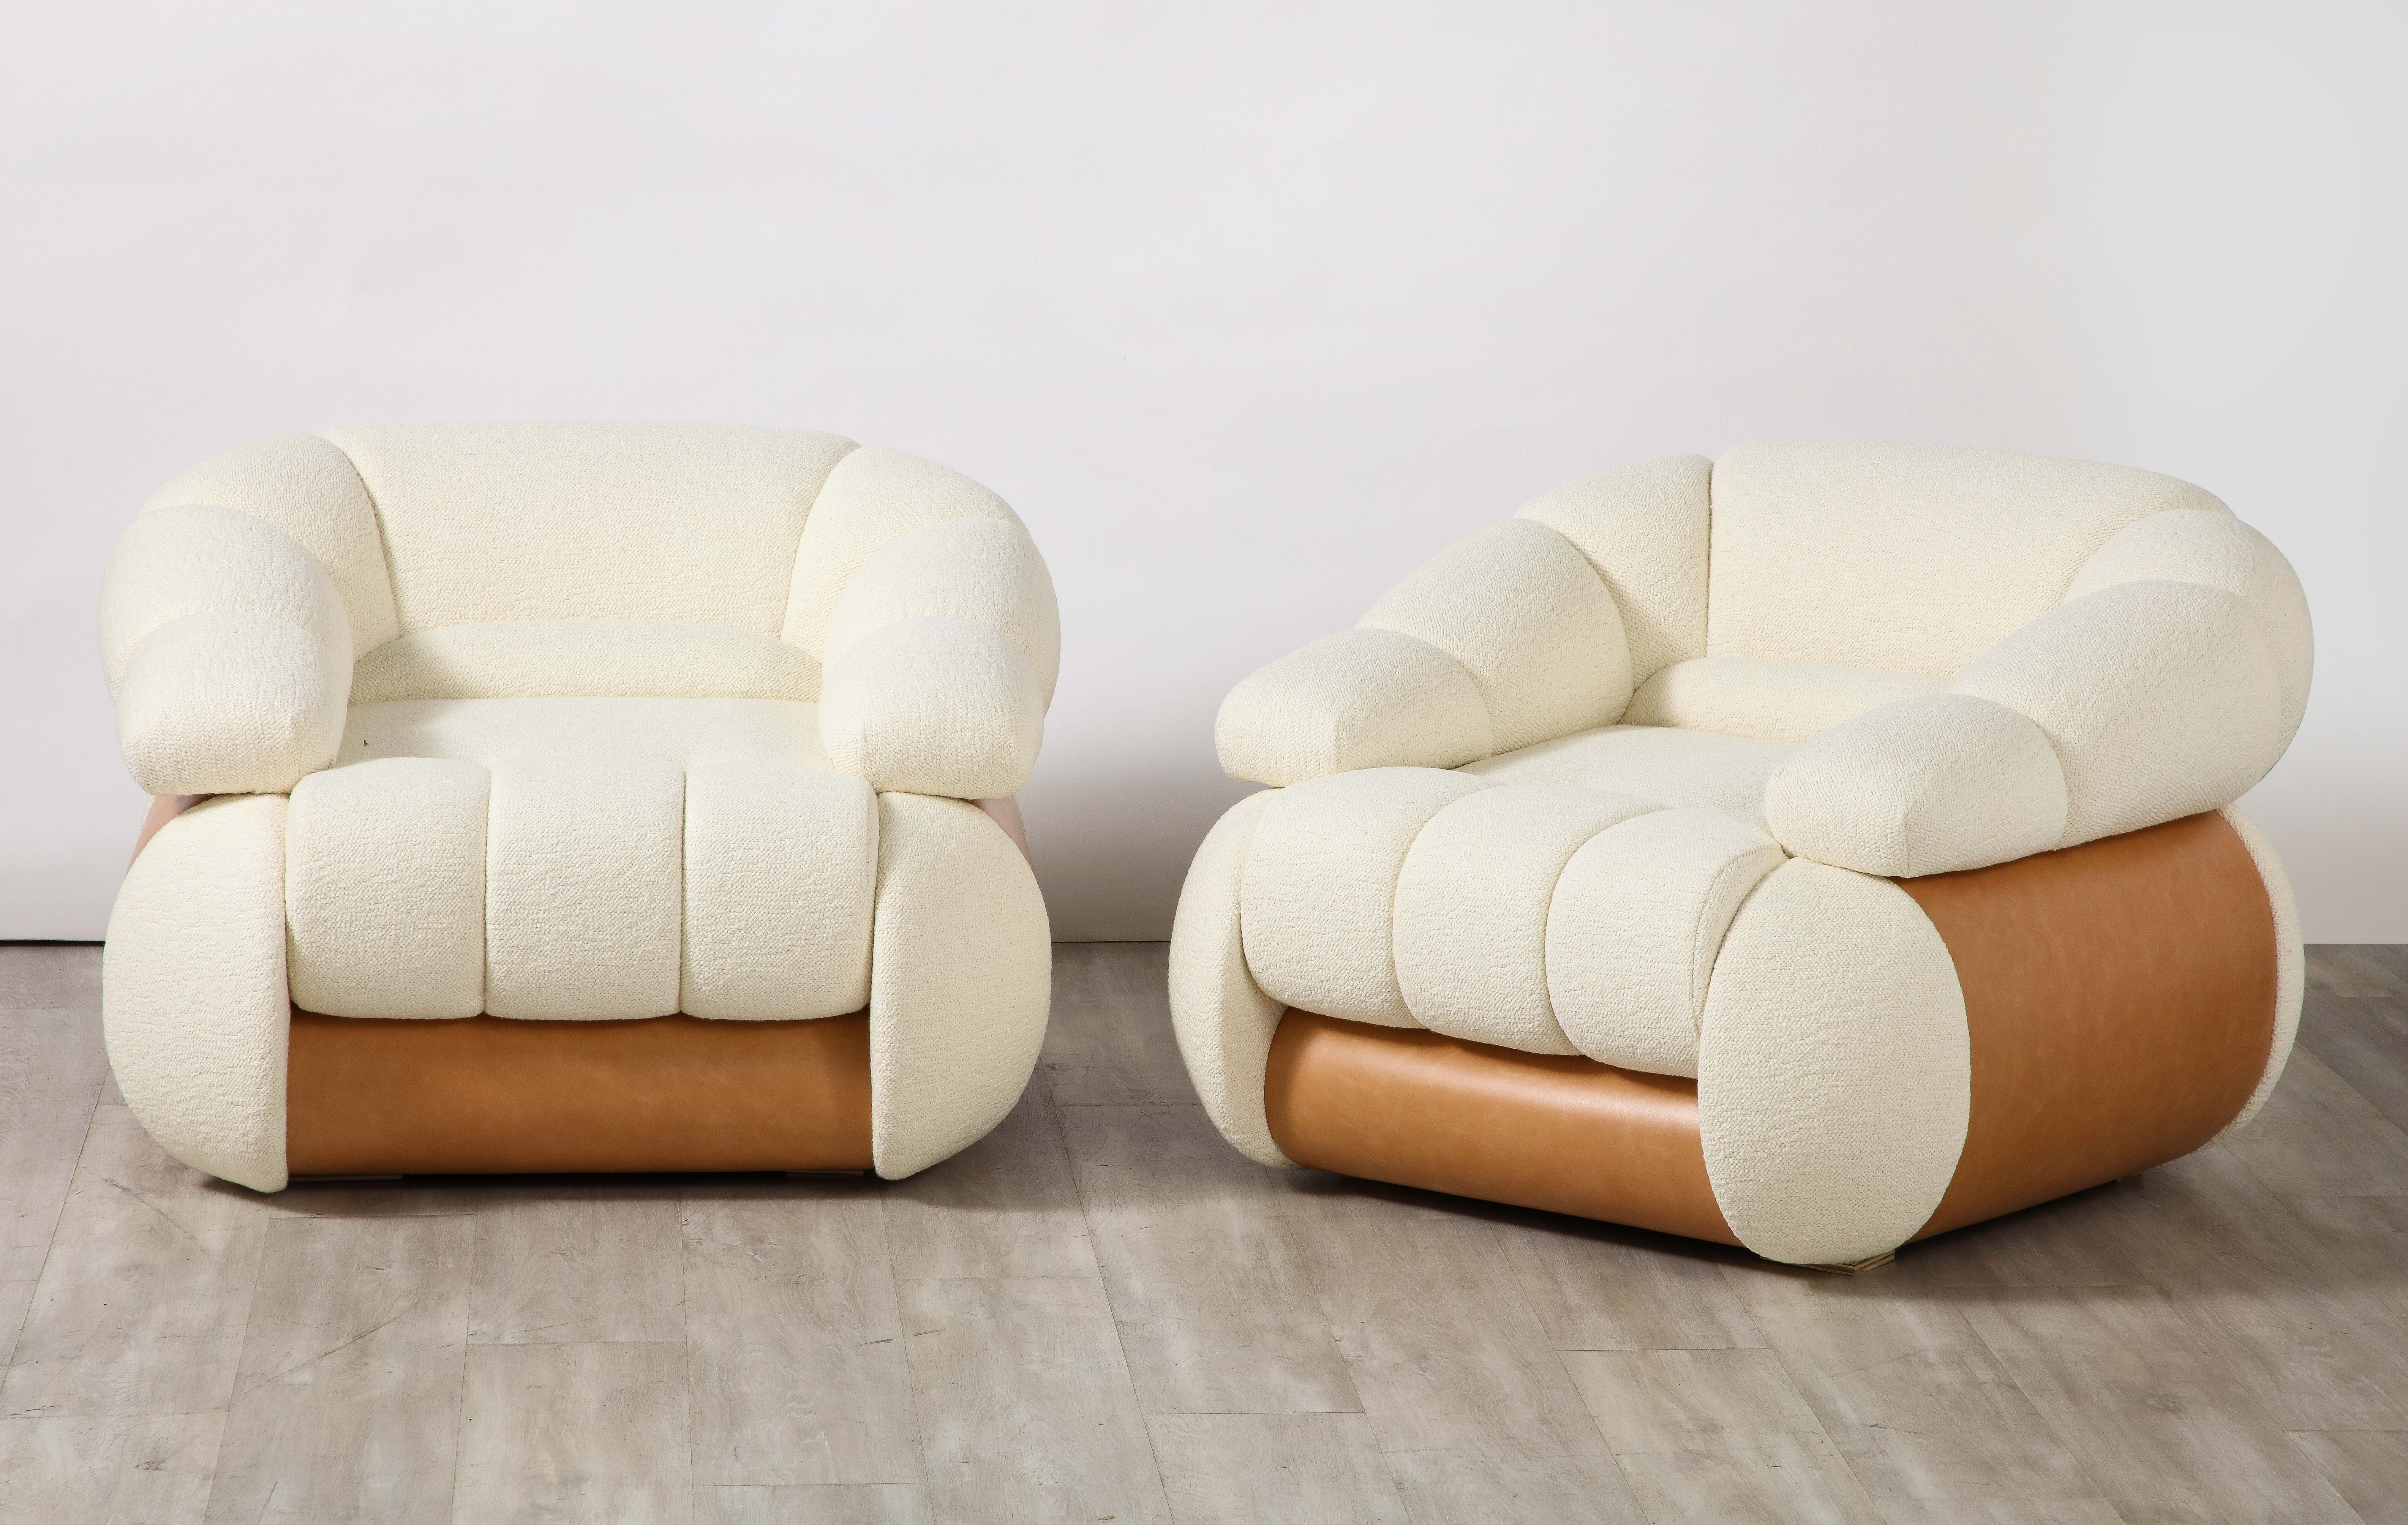 Pair of Adriano Piazzesi Italian 1970's lounge chairs; the whole with channel and tufted upholstery, the sides and back are curved and covered in a warm brown Italian leather. The chairs are constructed of original solid wood structure and have been